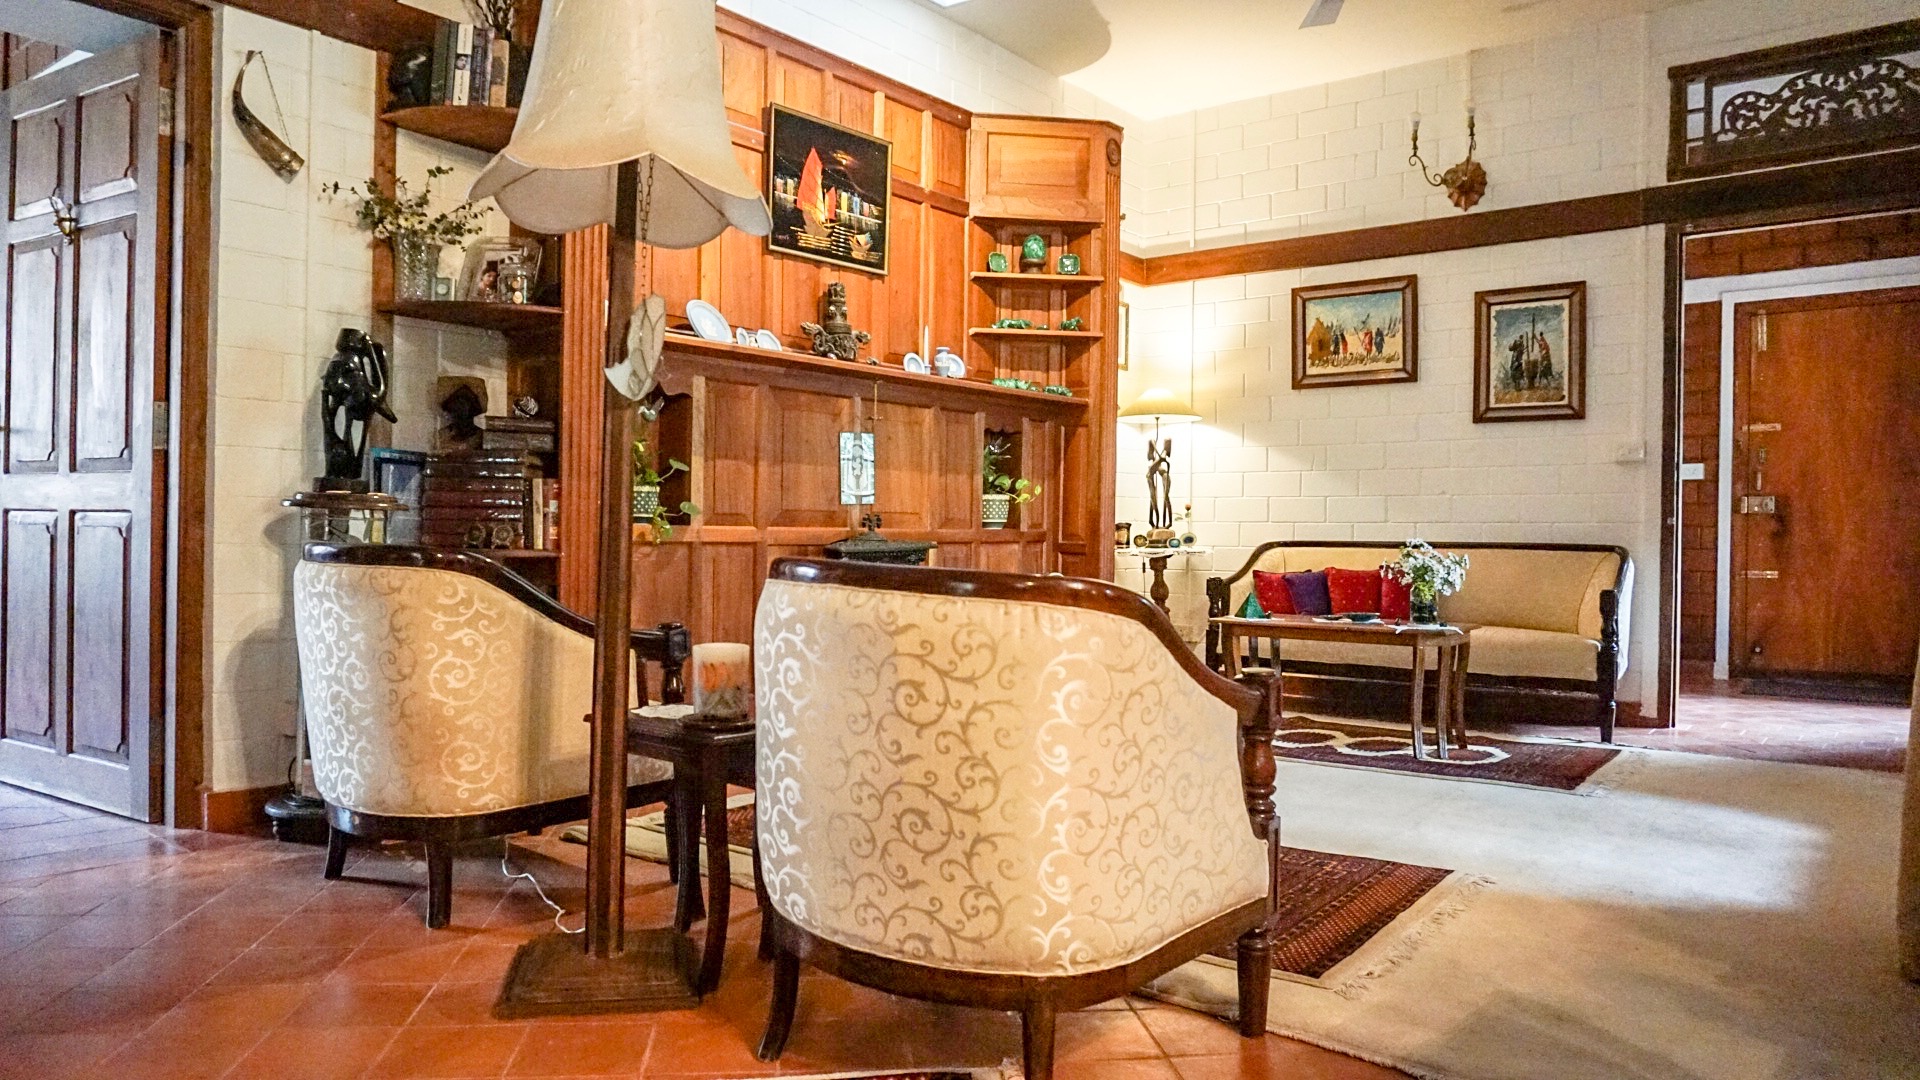 A Modern Rustic Bungalow in Kodagu Filled With Antique Treasures, Four ...